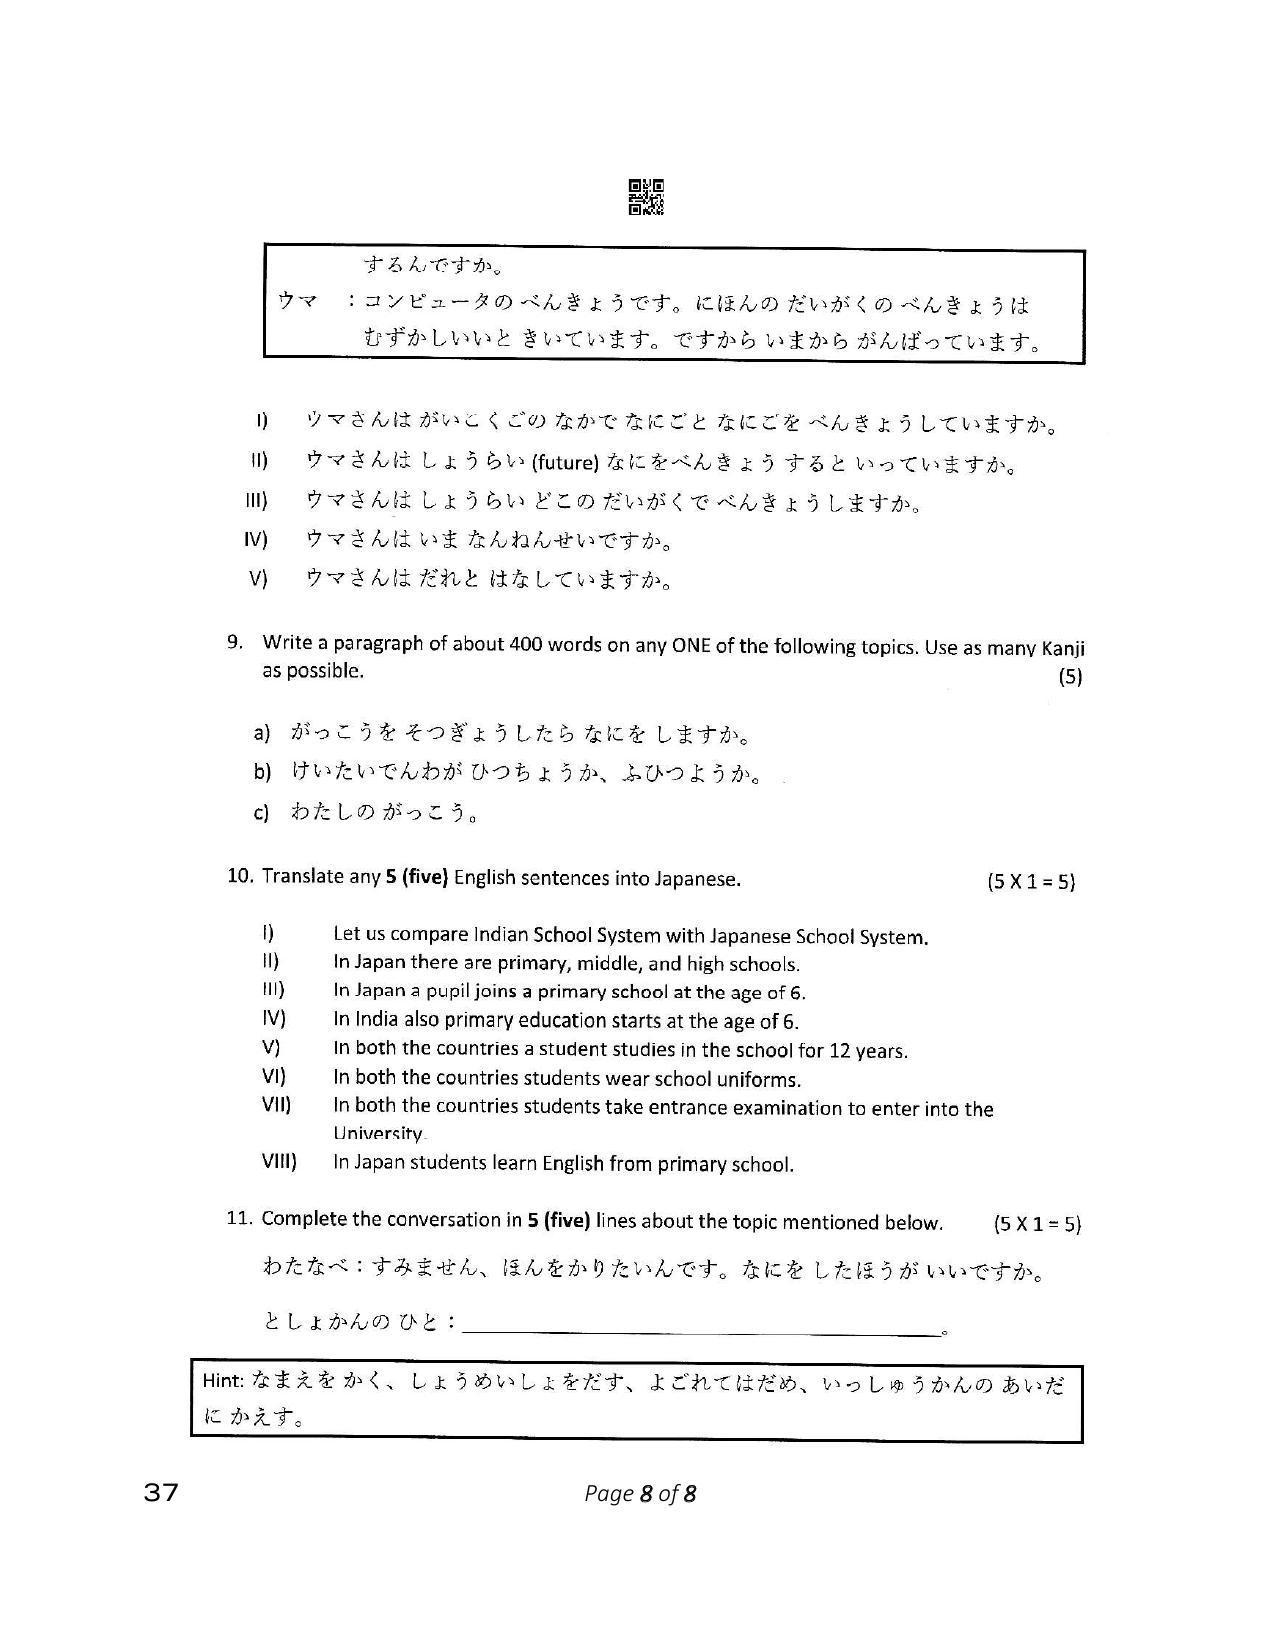 CBSE Class 12 37_Japanese 2023 Question Paper - Page 8